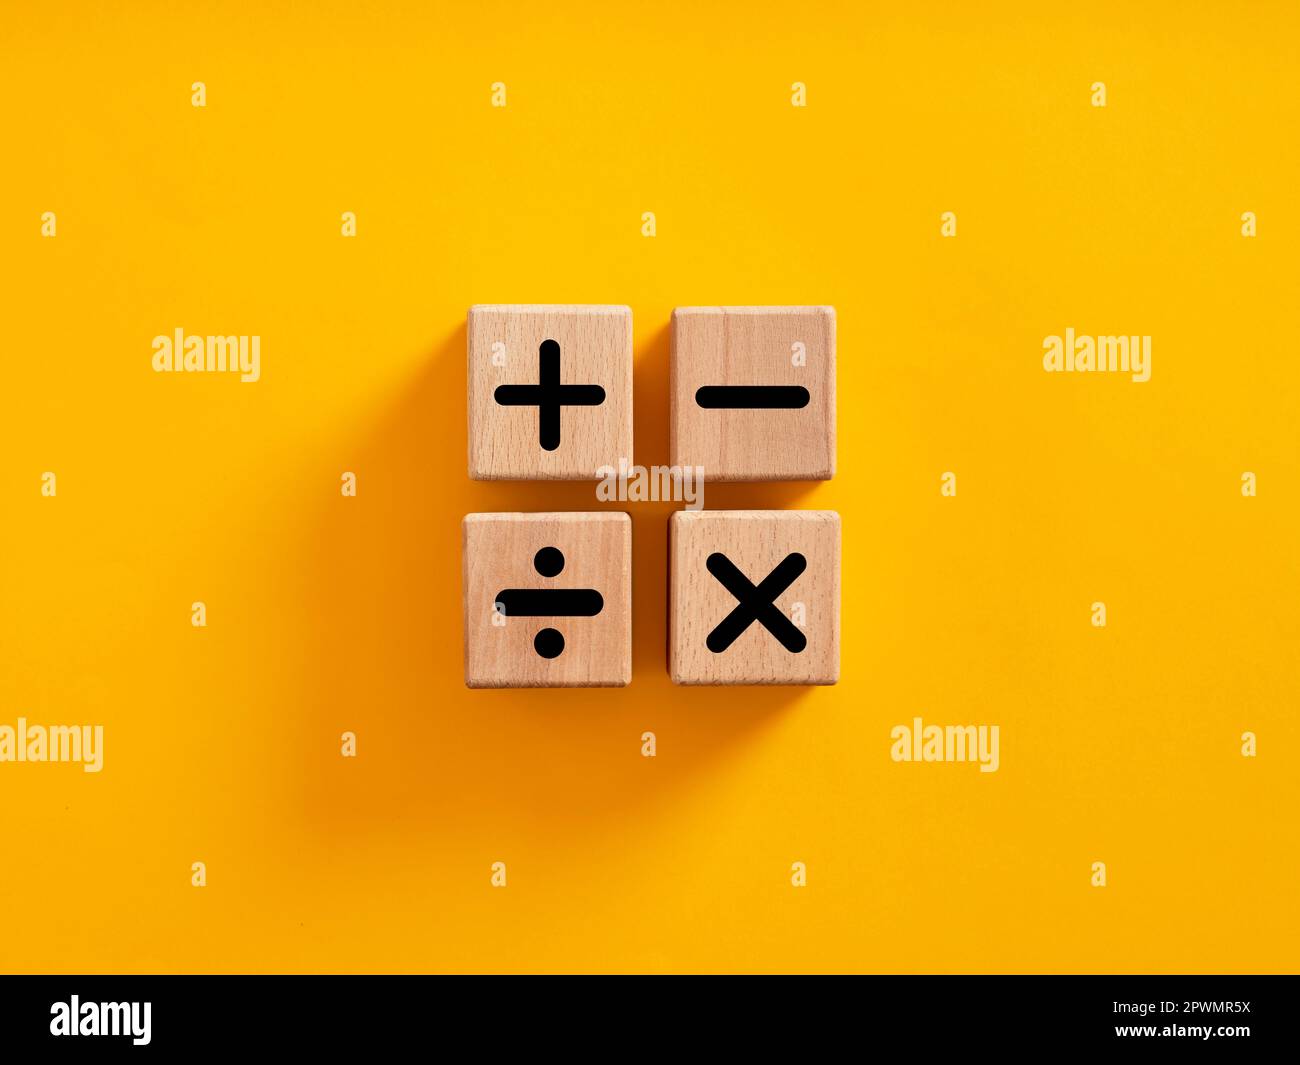 Basic mathematical operations symbols. Plus, minus, multiply and divide symbols on wooden cubes on yellow background. Mathematic or math education and Stock Photo